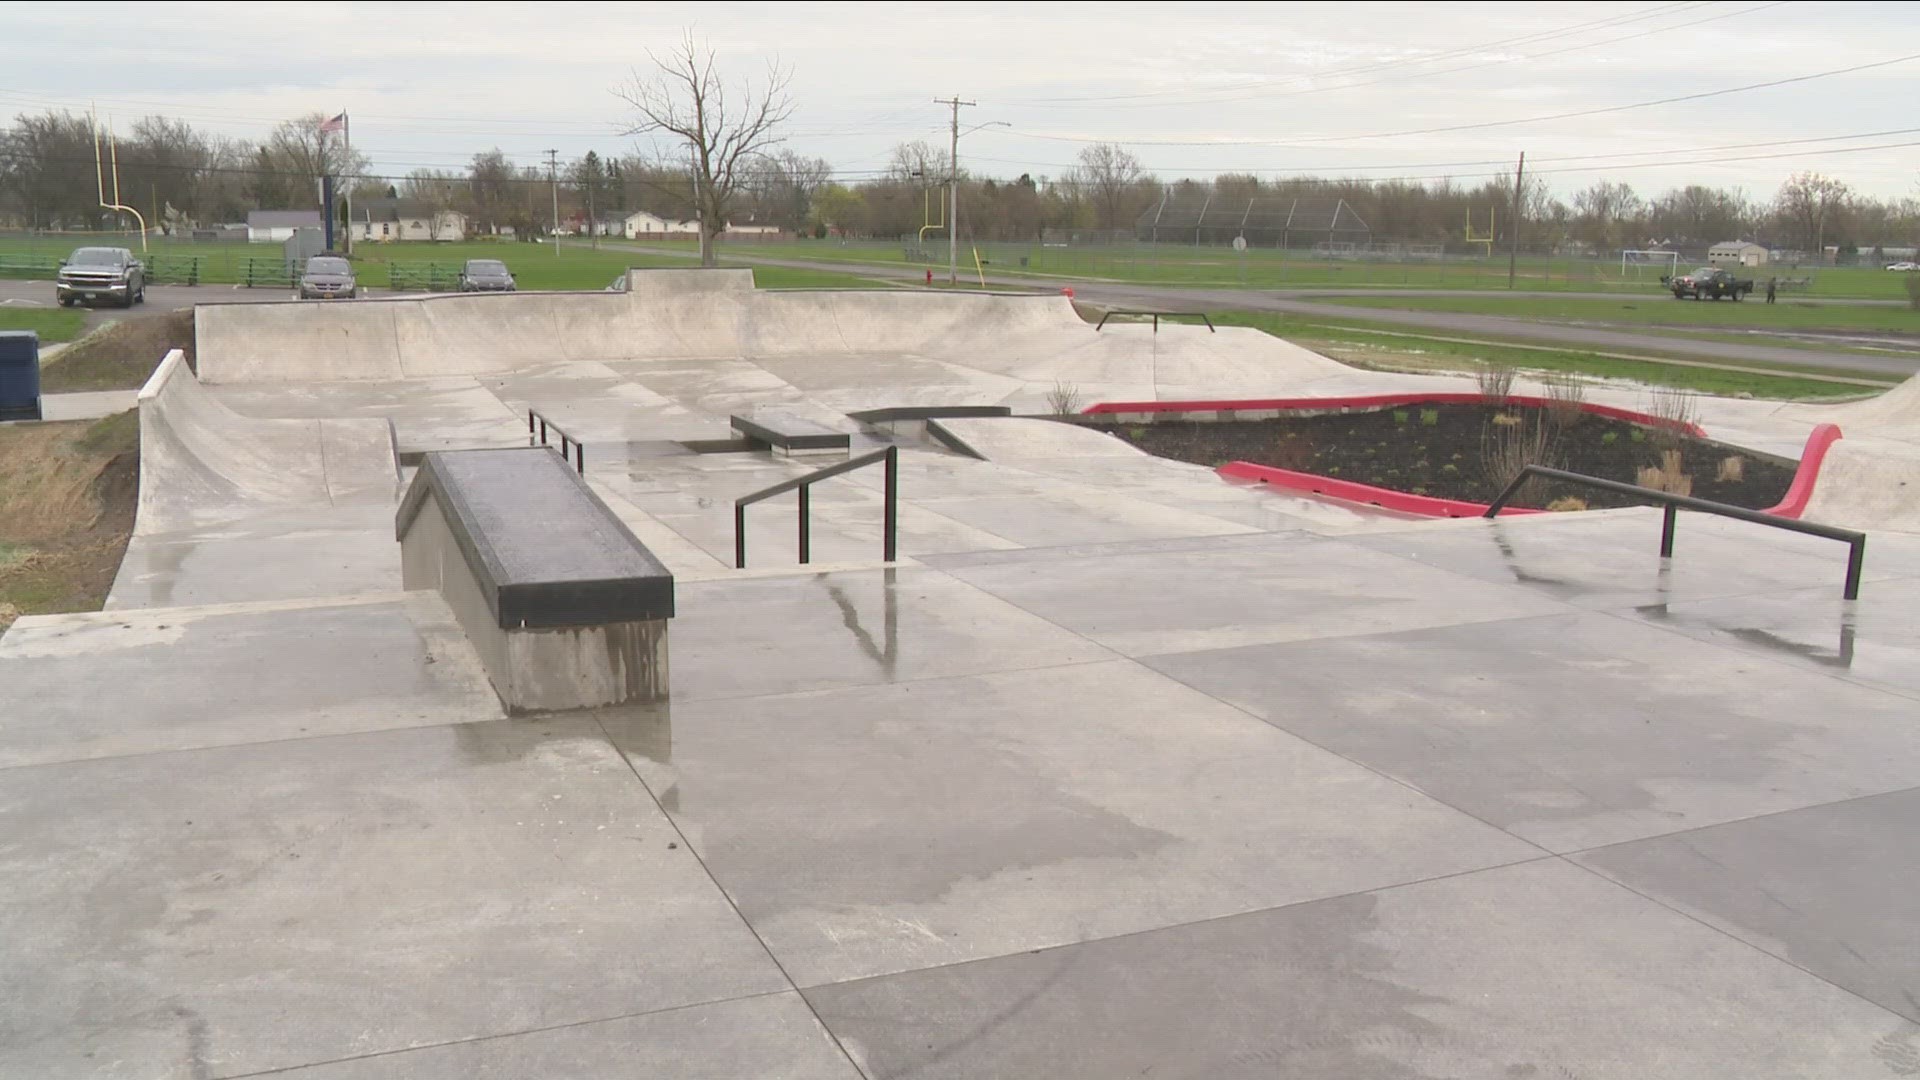 The new concrete skatepark will be opening after years of planning.